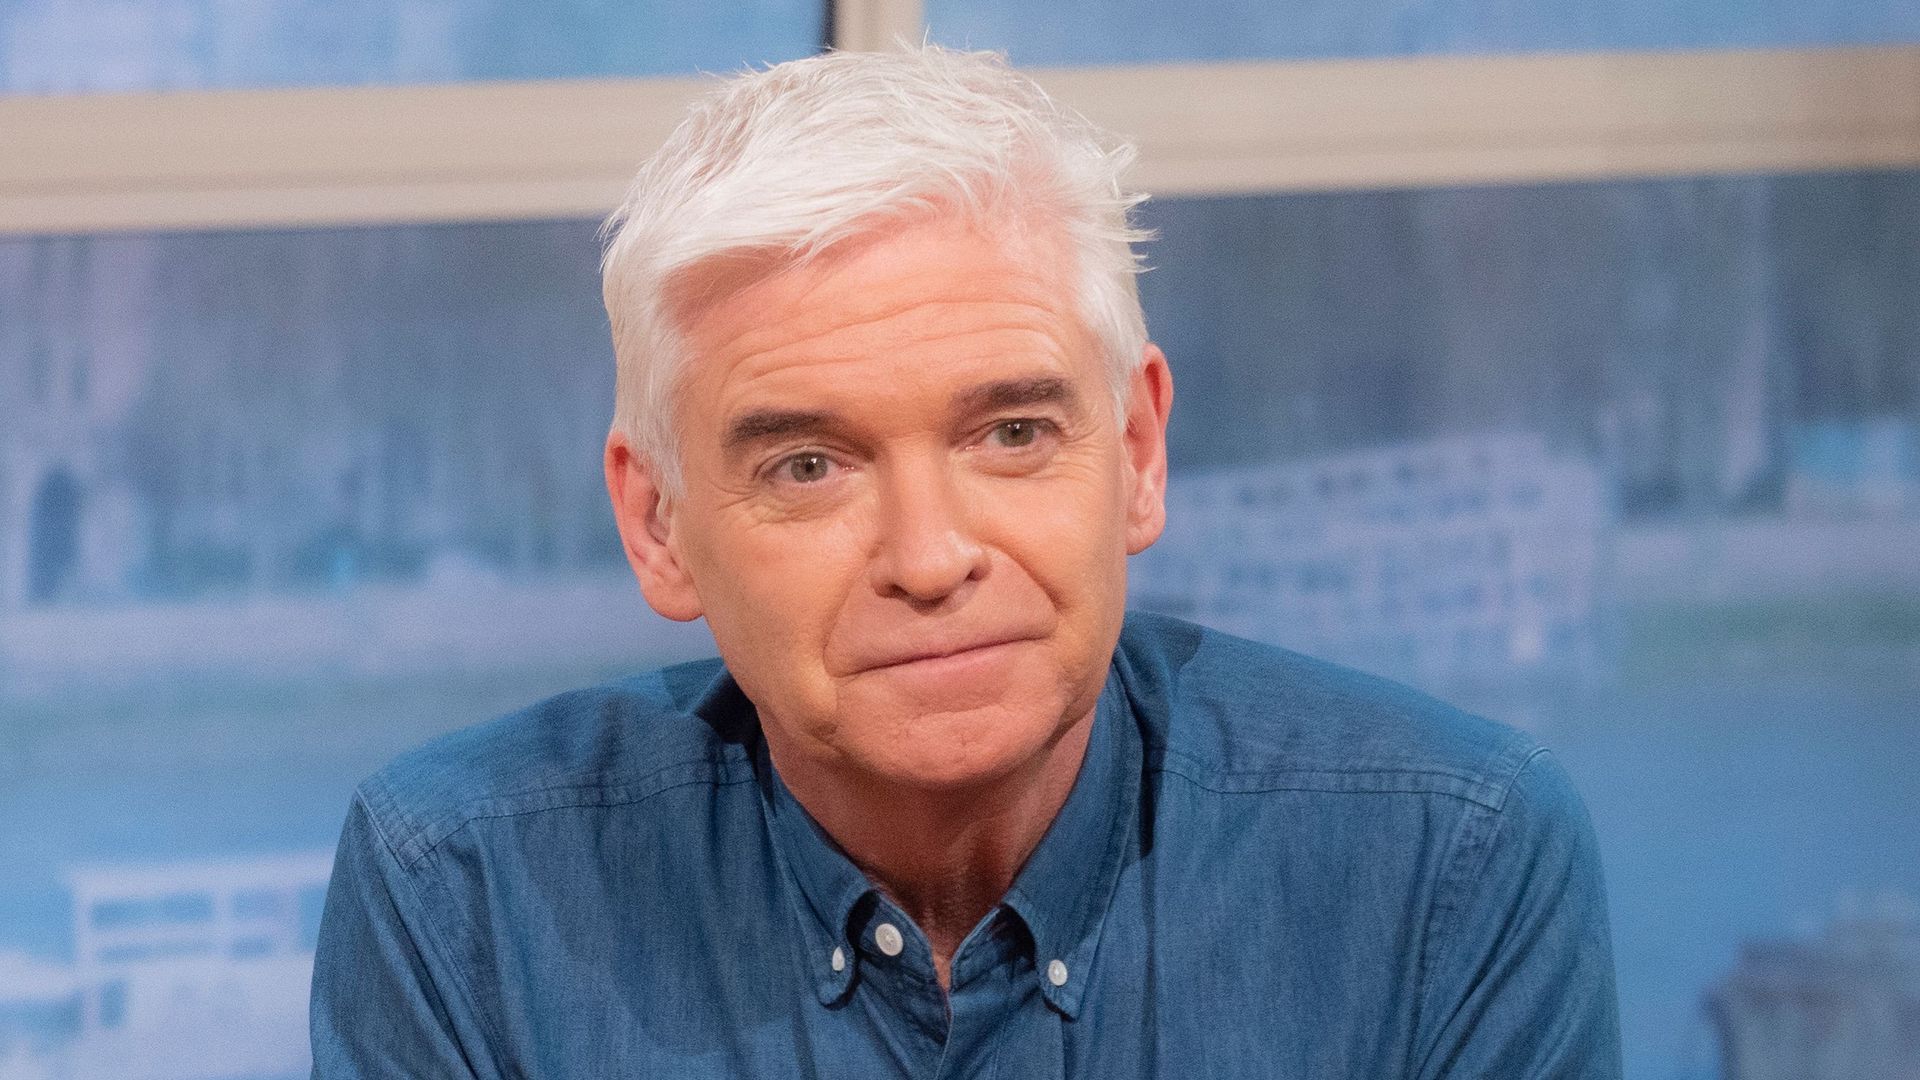 Phillip Schofield puts £1.2m home with wife Steph on the market after This Morning axe